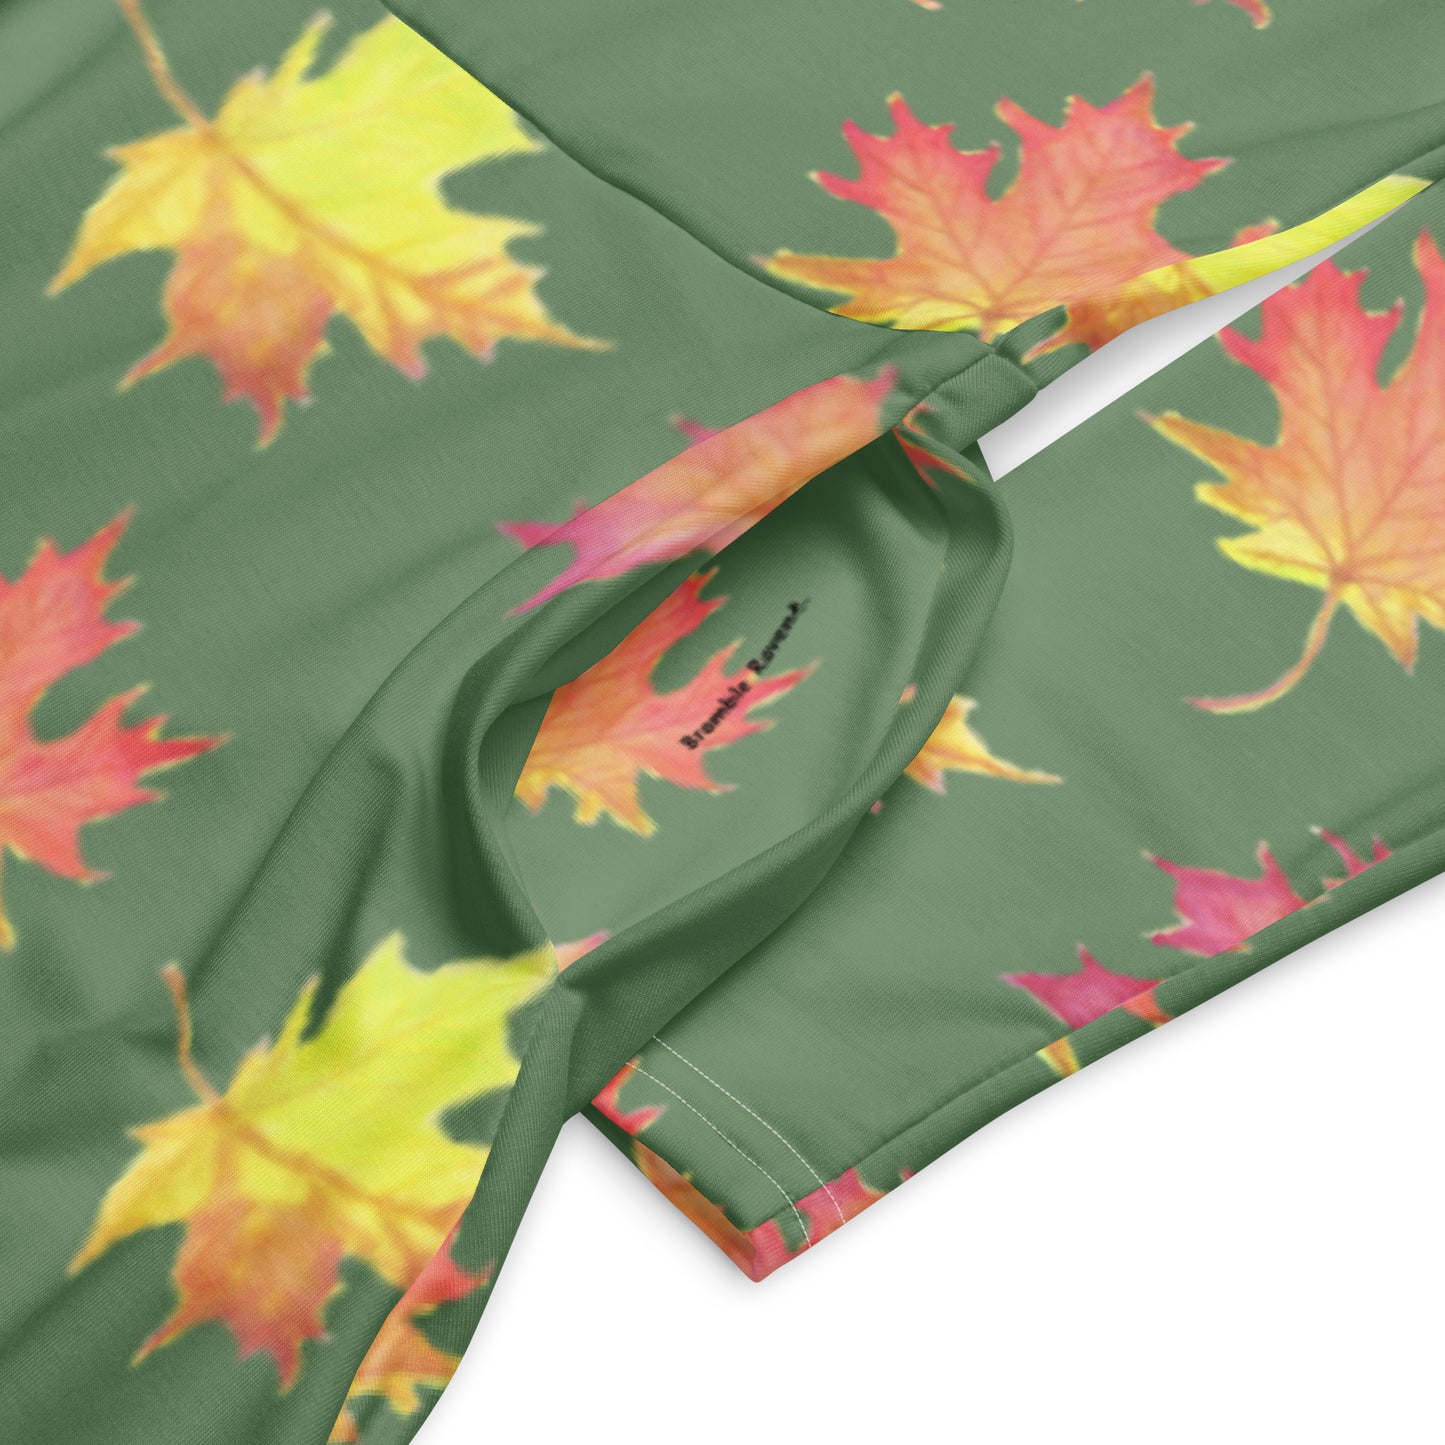 Long sleeve midi dress. Watercolor fall leaves patterned over an amulet green background. Soft and flattering fit. Boatline neck, fitted waist, flared bottom, and side pockets. Closeup detail of pocket and sleeve.